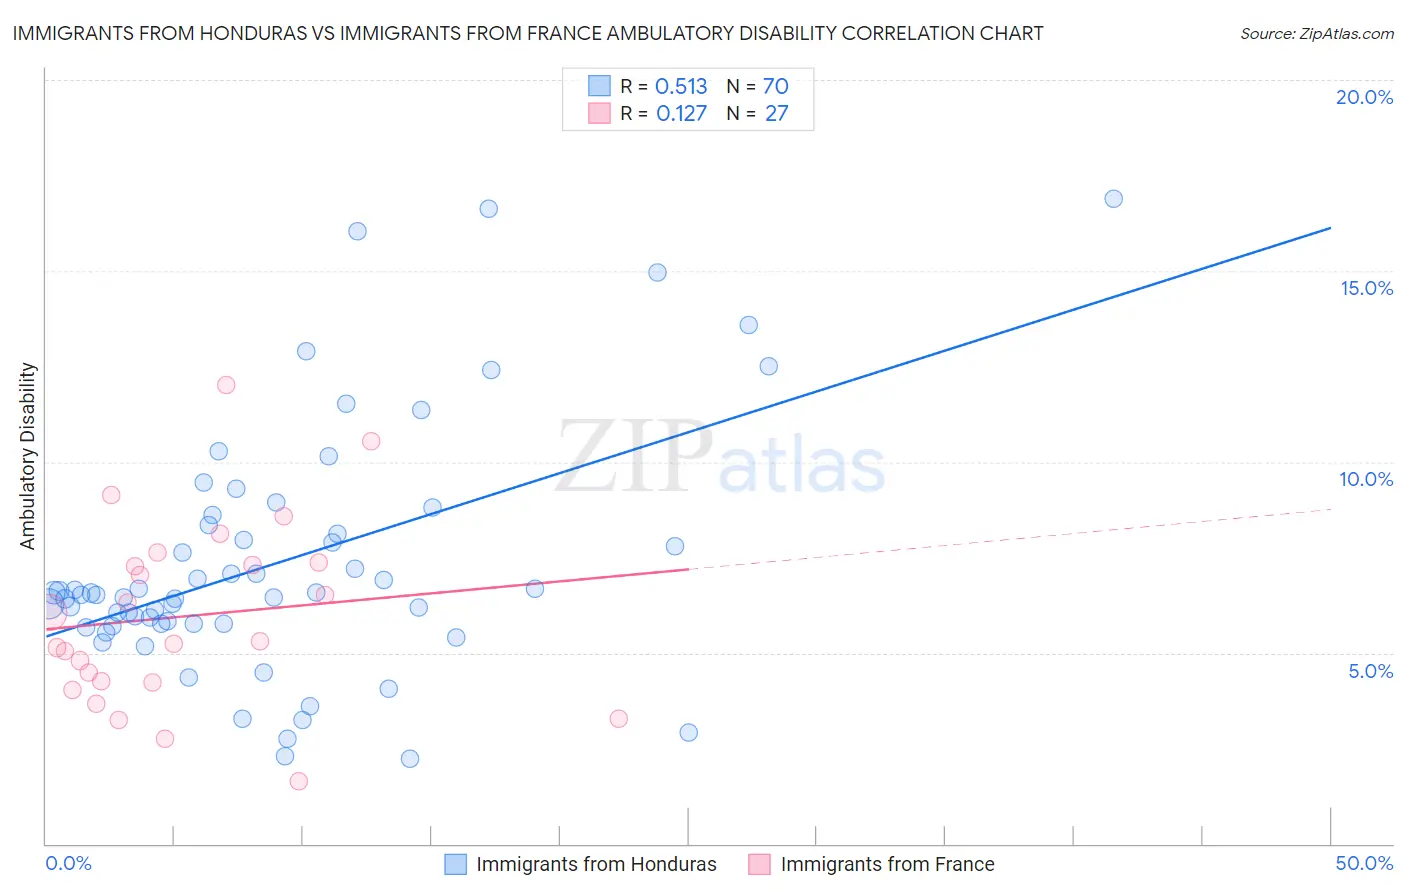 Immigrants from Honduras vs Immigrants from France Ambulatory Disability